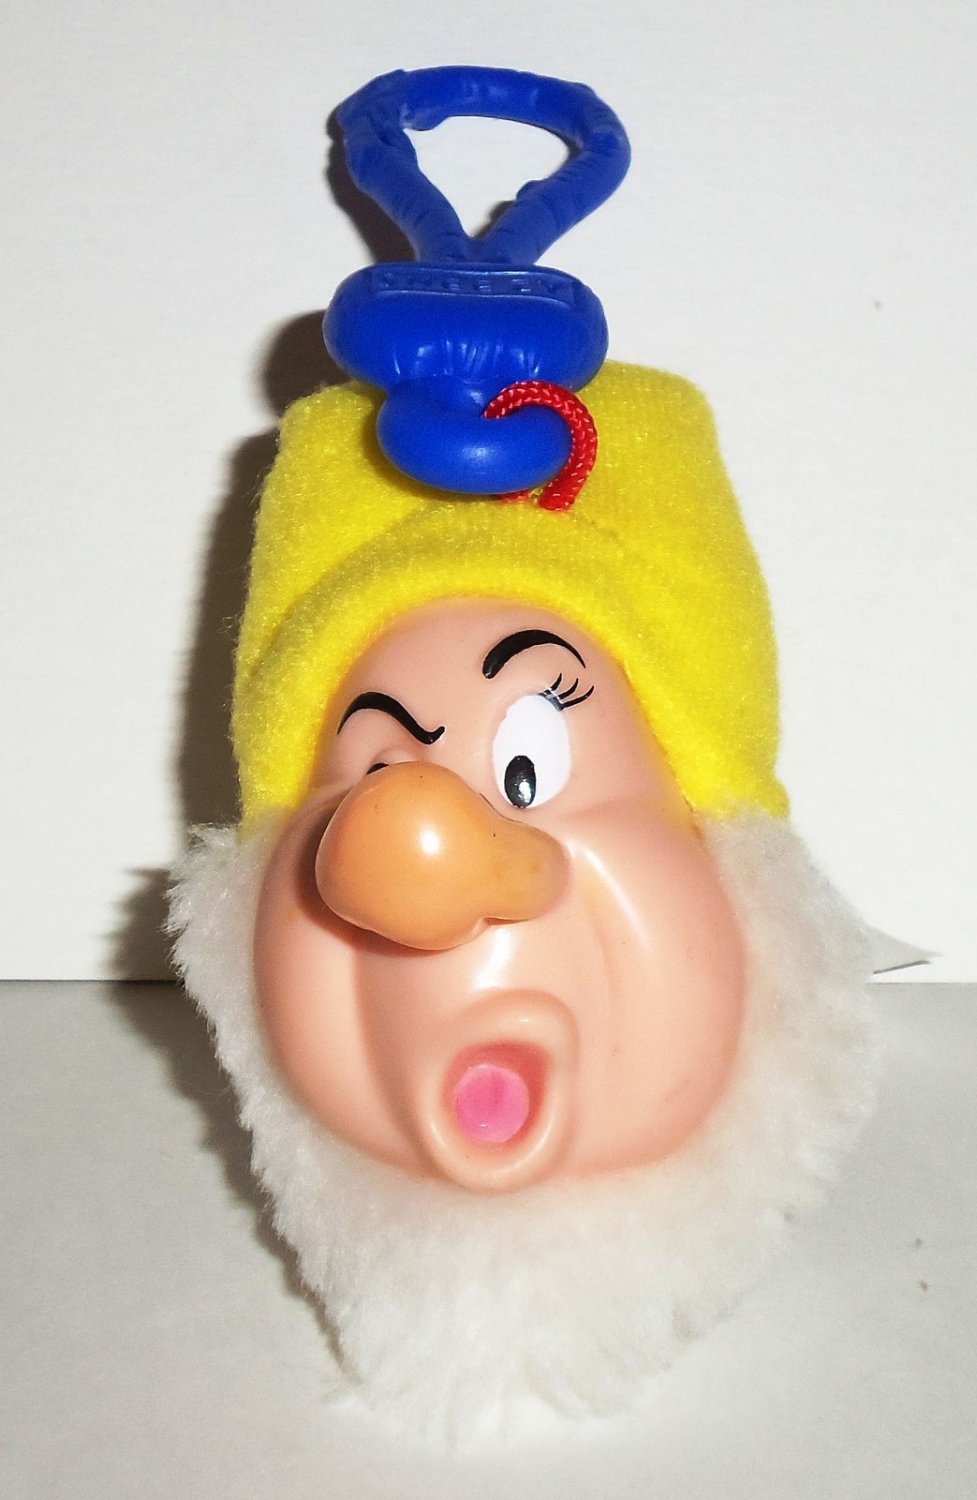 Mcdonalds 2001 Disneys Snow White And The Seven Dwarfs Sneezy Happy Meal Toy Loose Used 